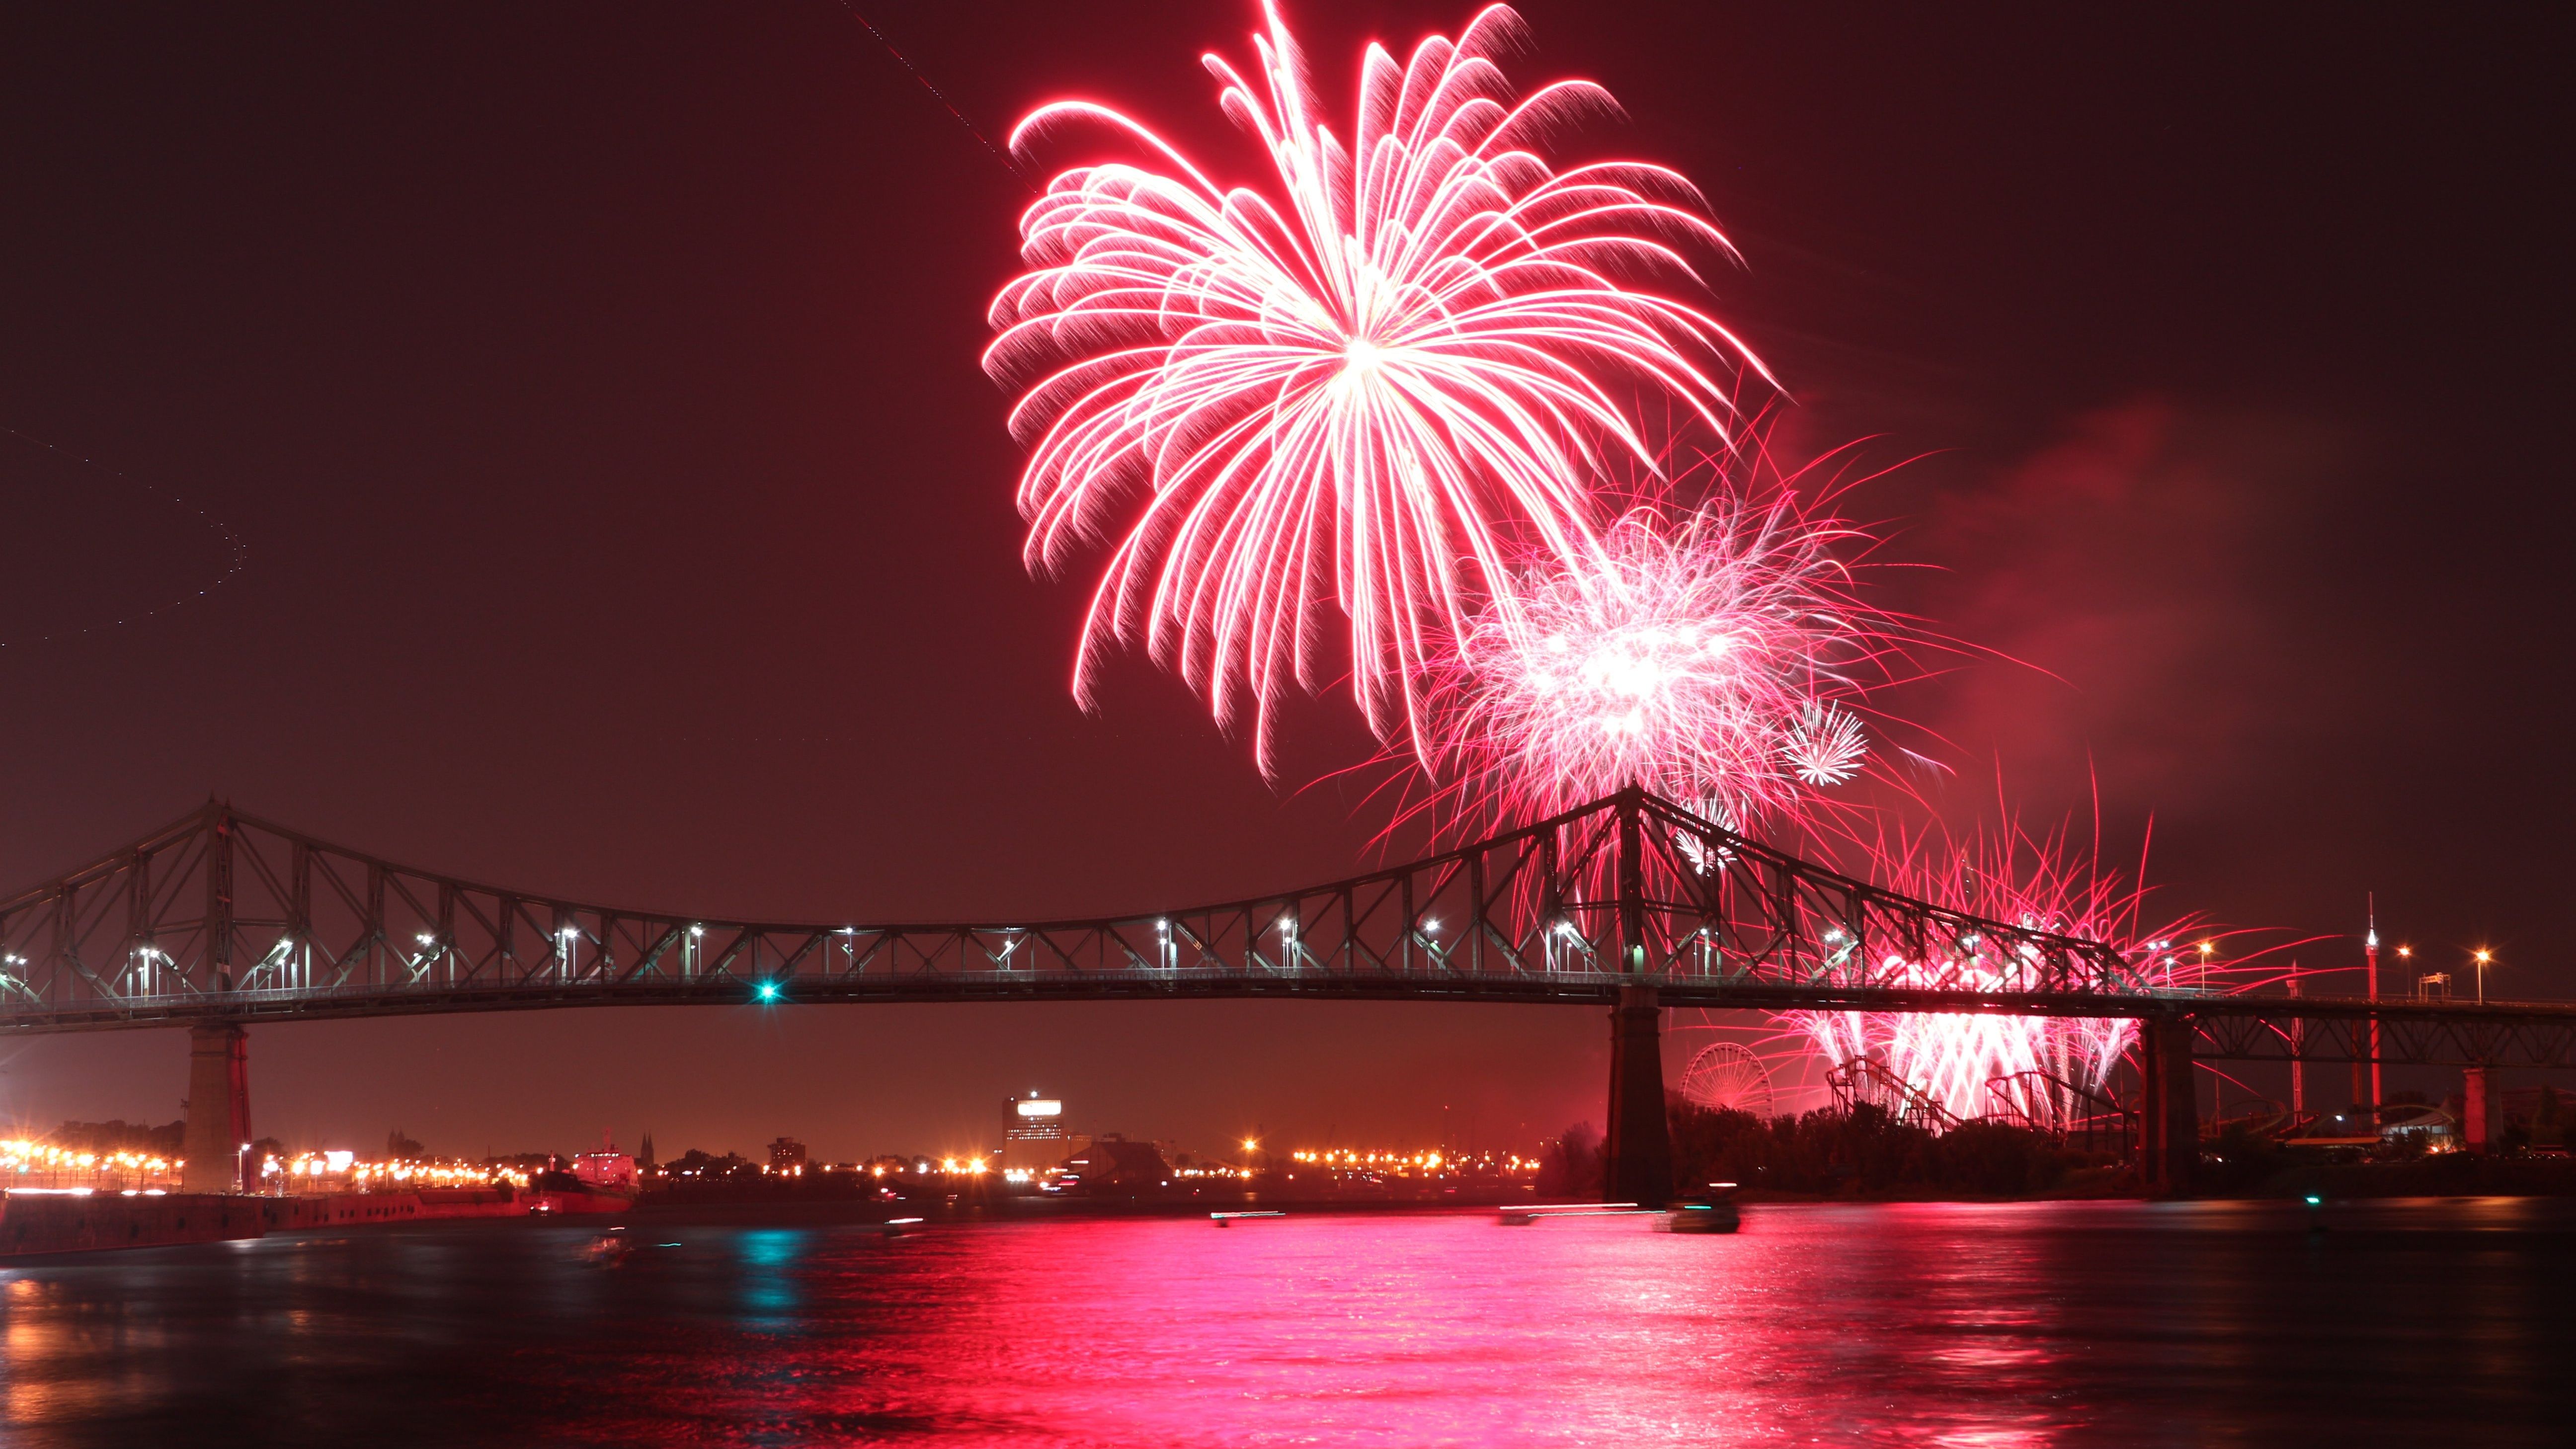 Pink fireworks burst in the night sky over a bridge.